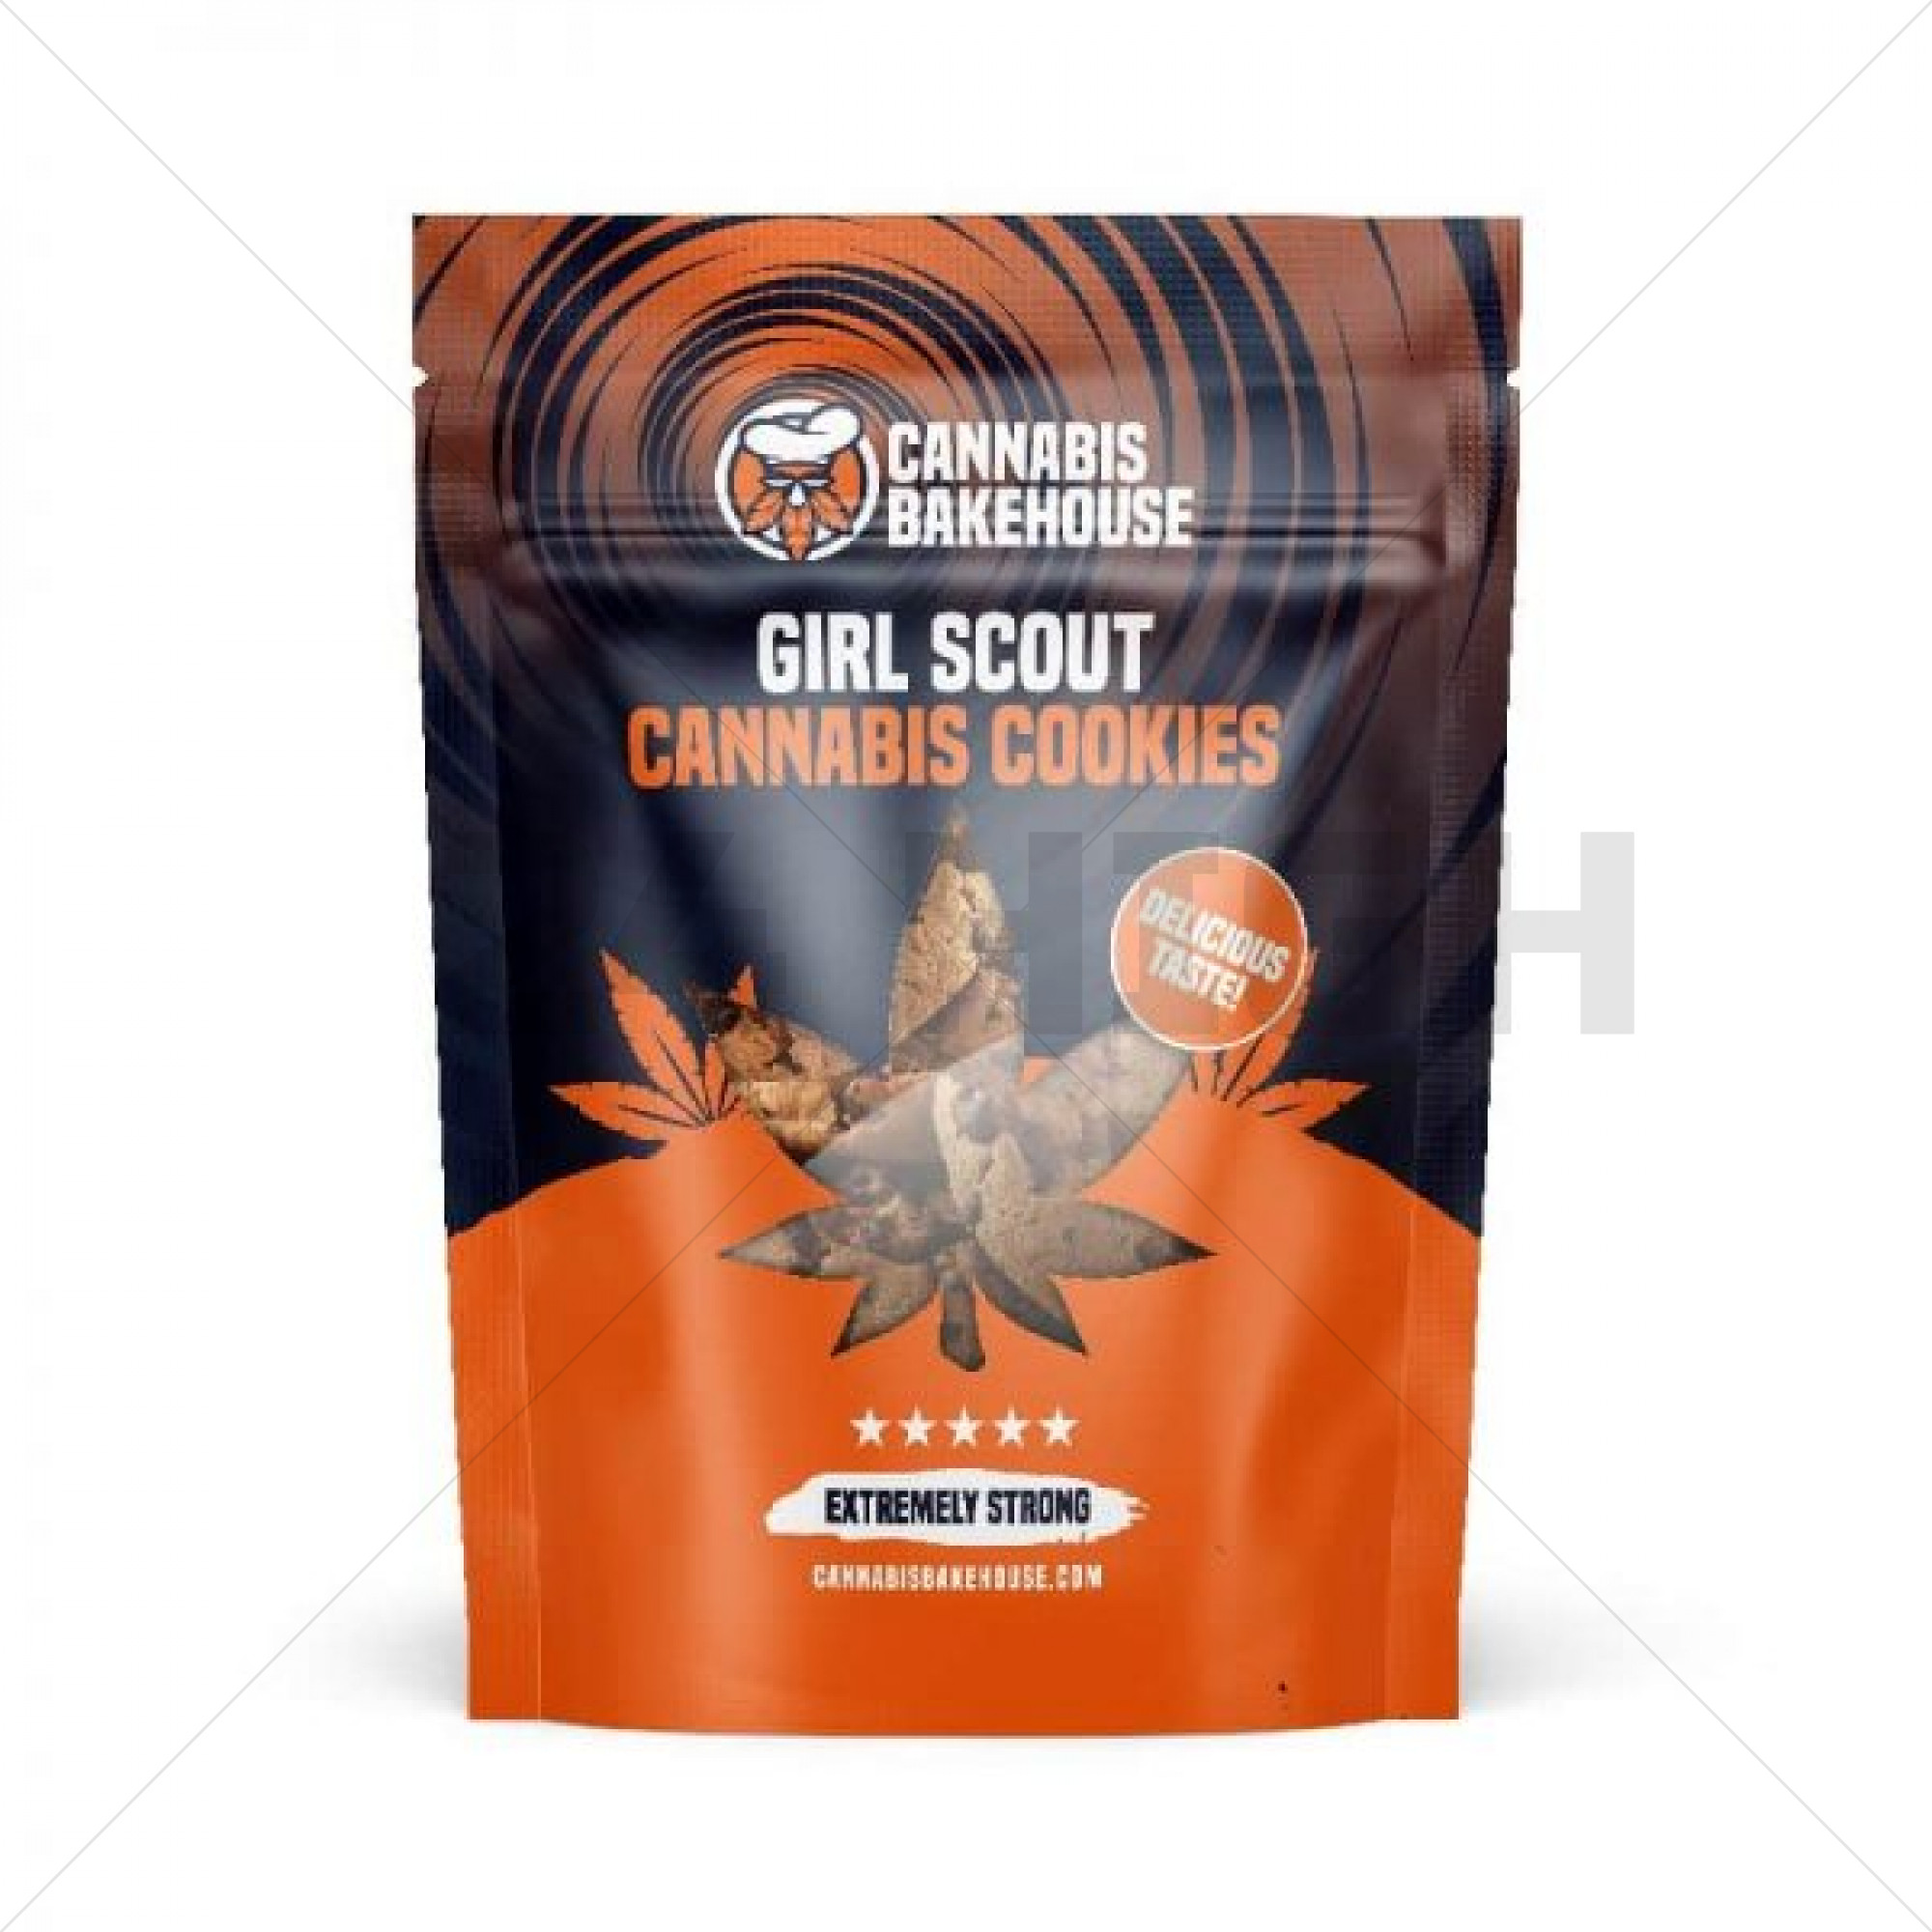 Cannabis Bakehouse Girl Scout Cookies